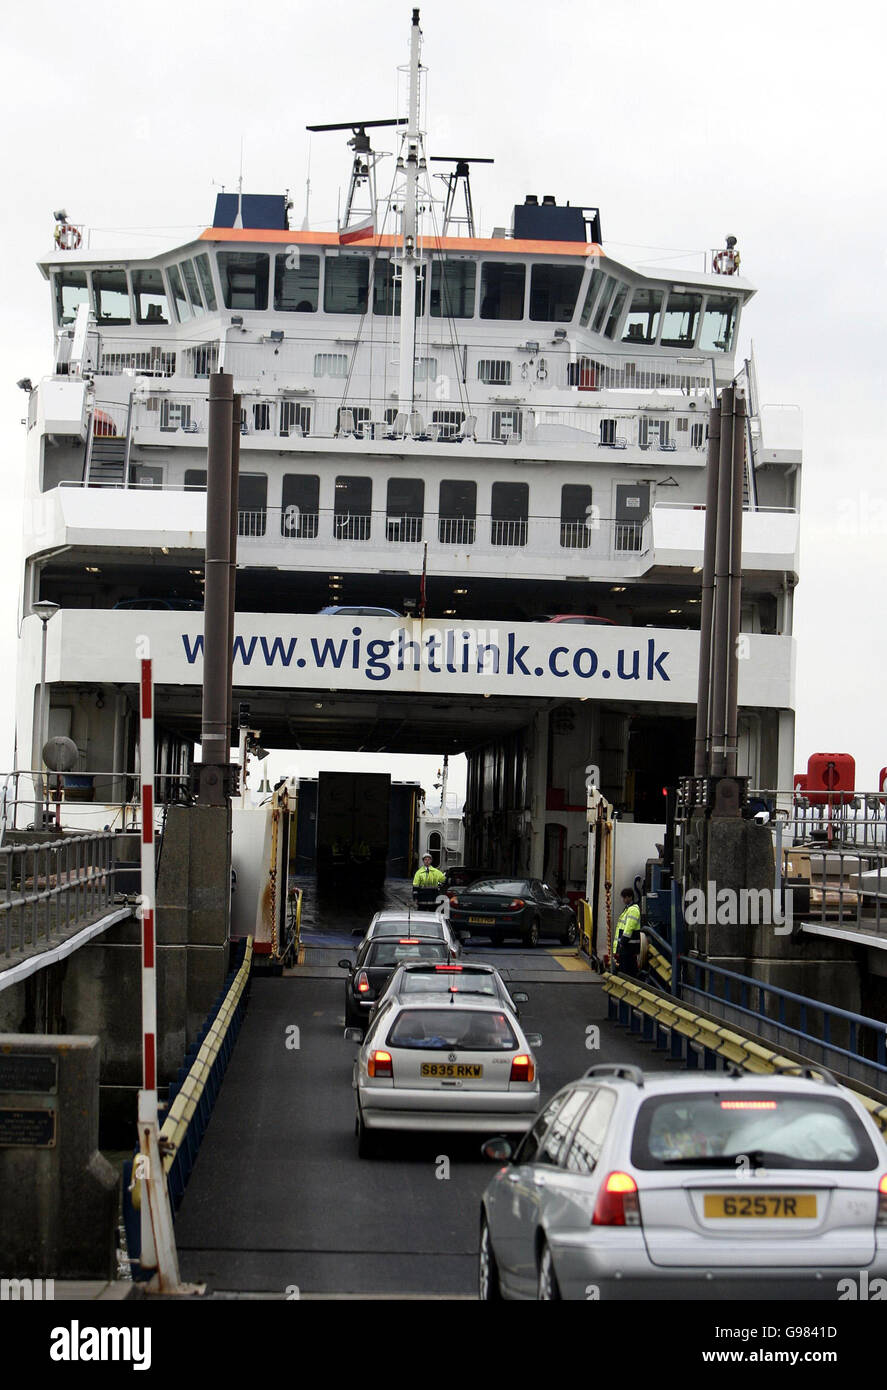 A stock photo of cars driving onto the Wightlink Ferry at Fishbourne, the Isle of Wight, to Portsmouth, Tuesday February 21, 2006. PRESS ASSOCIATION Photo. Photo credit should read: Andrew Parsons/PA Stock Photo